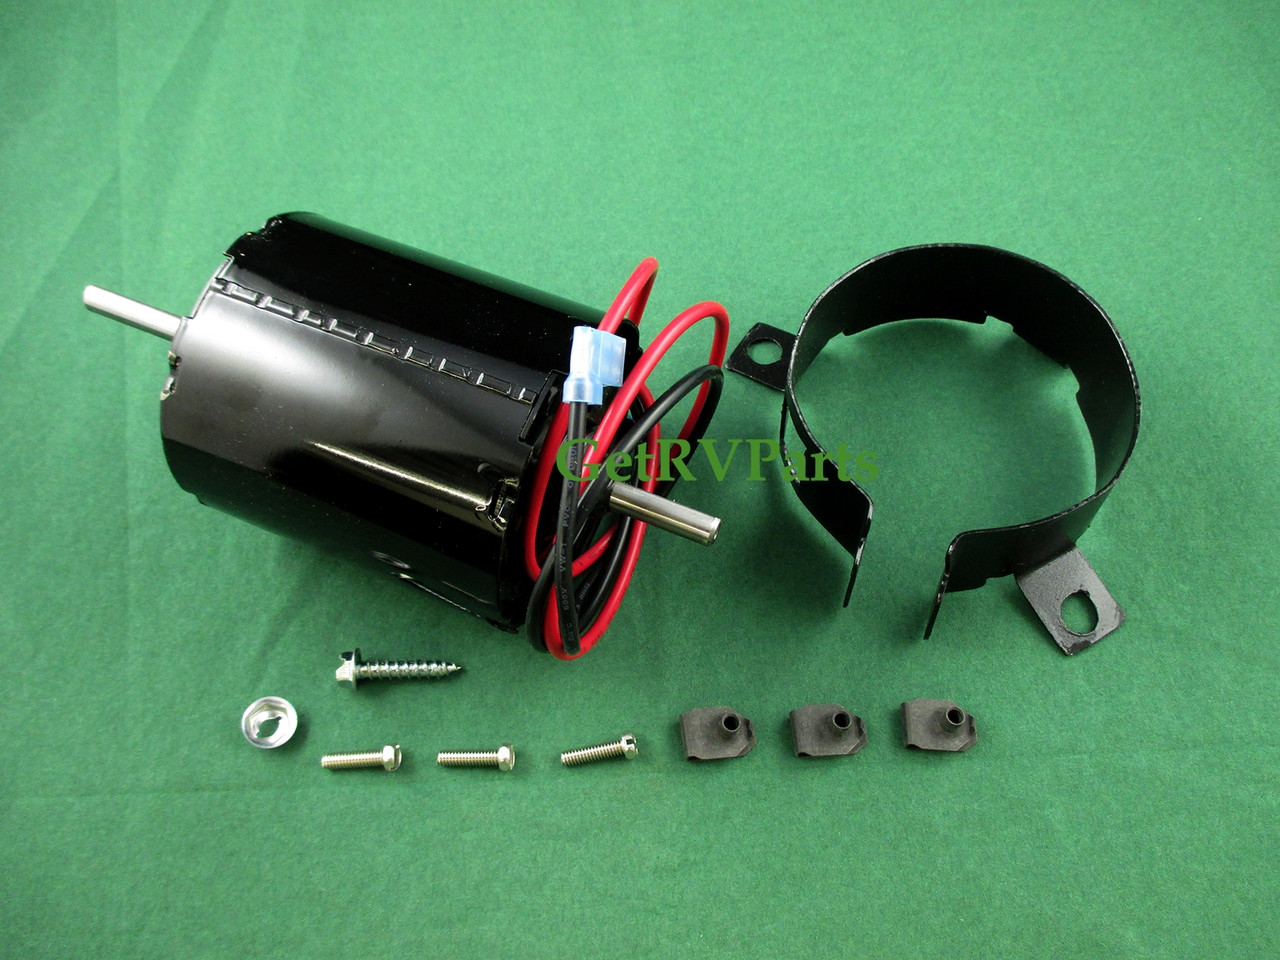 Atwood 37358 RV Hydro Flame Furnace Heater Motor Kit